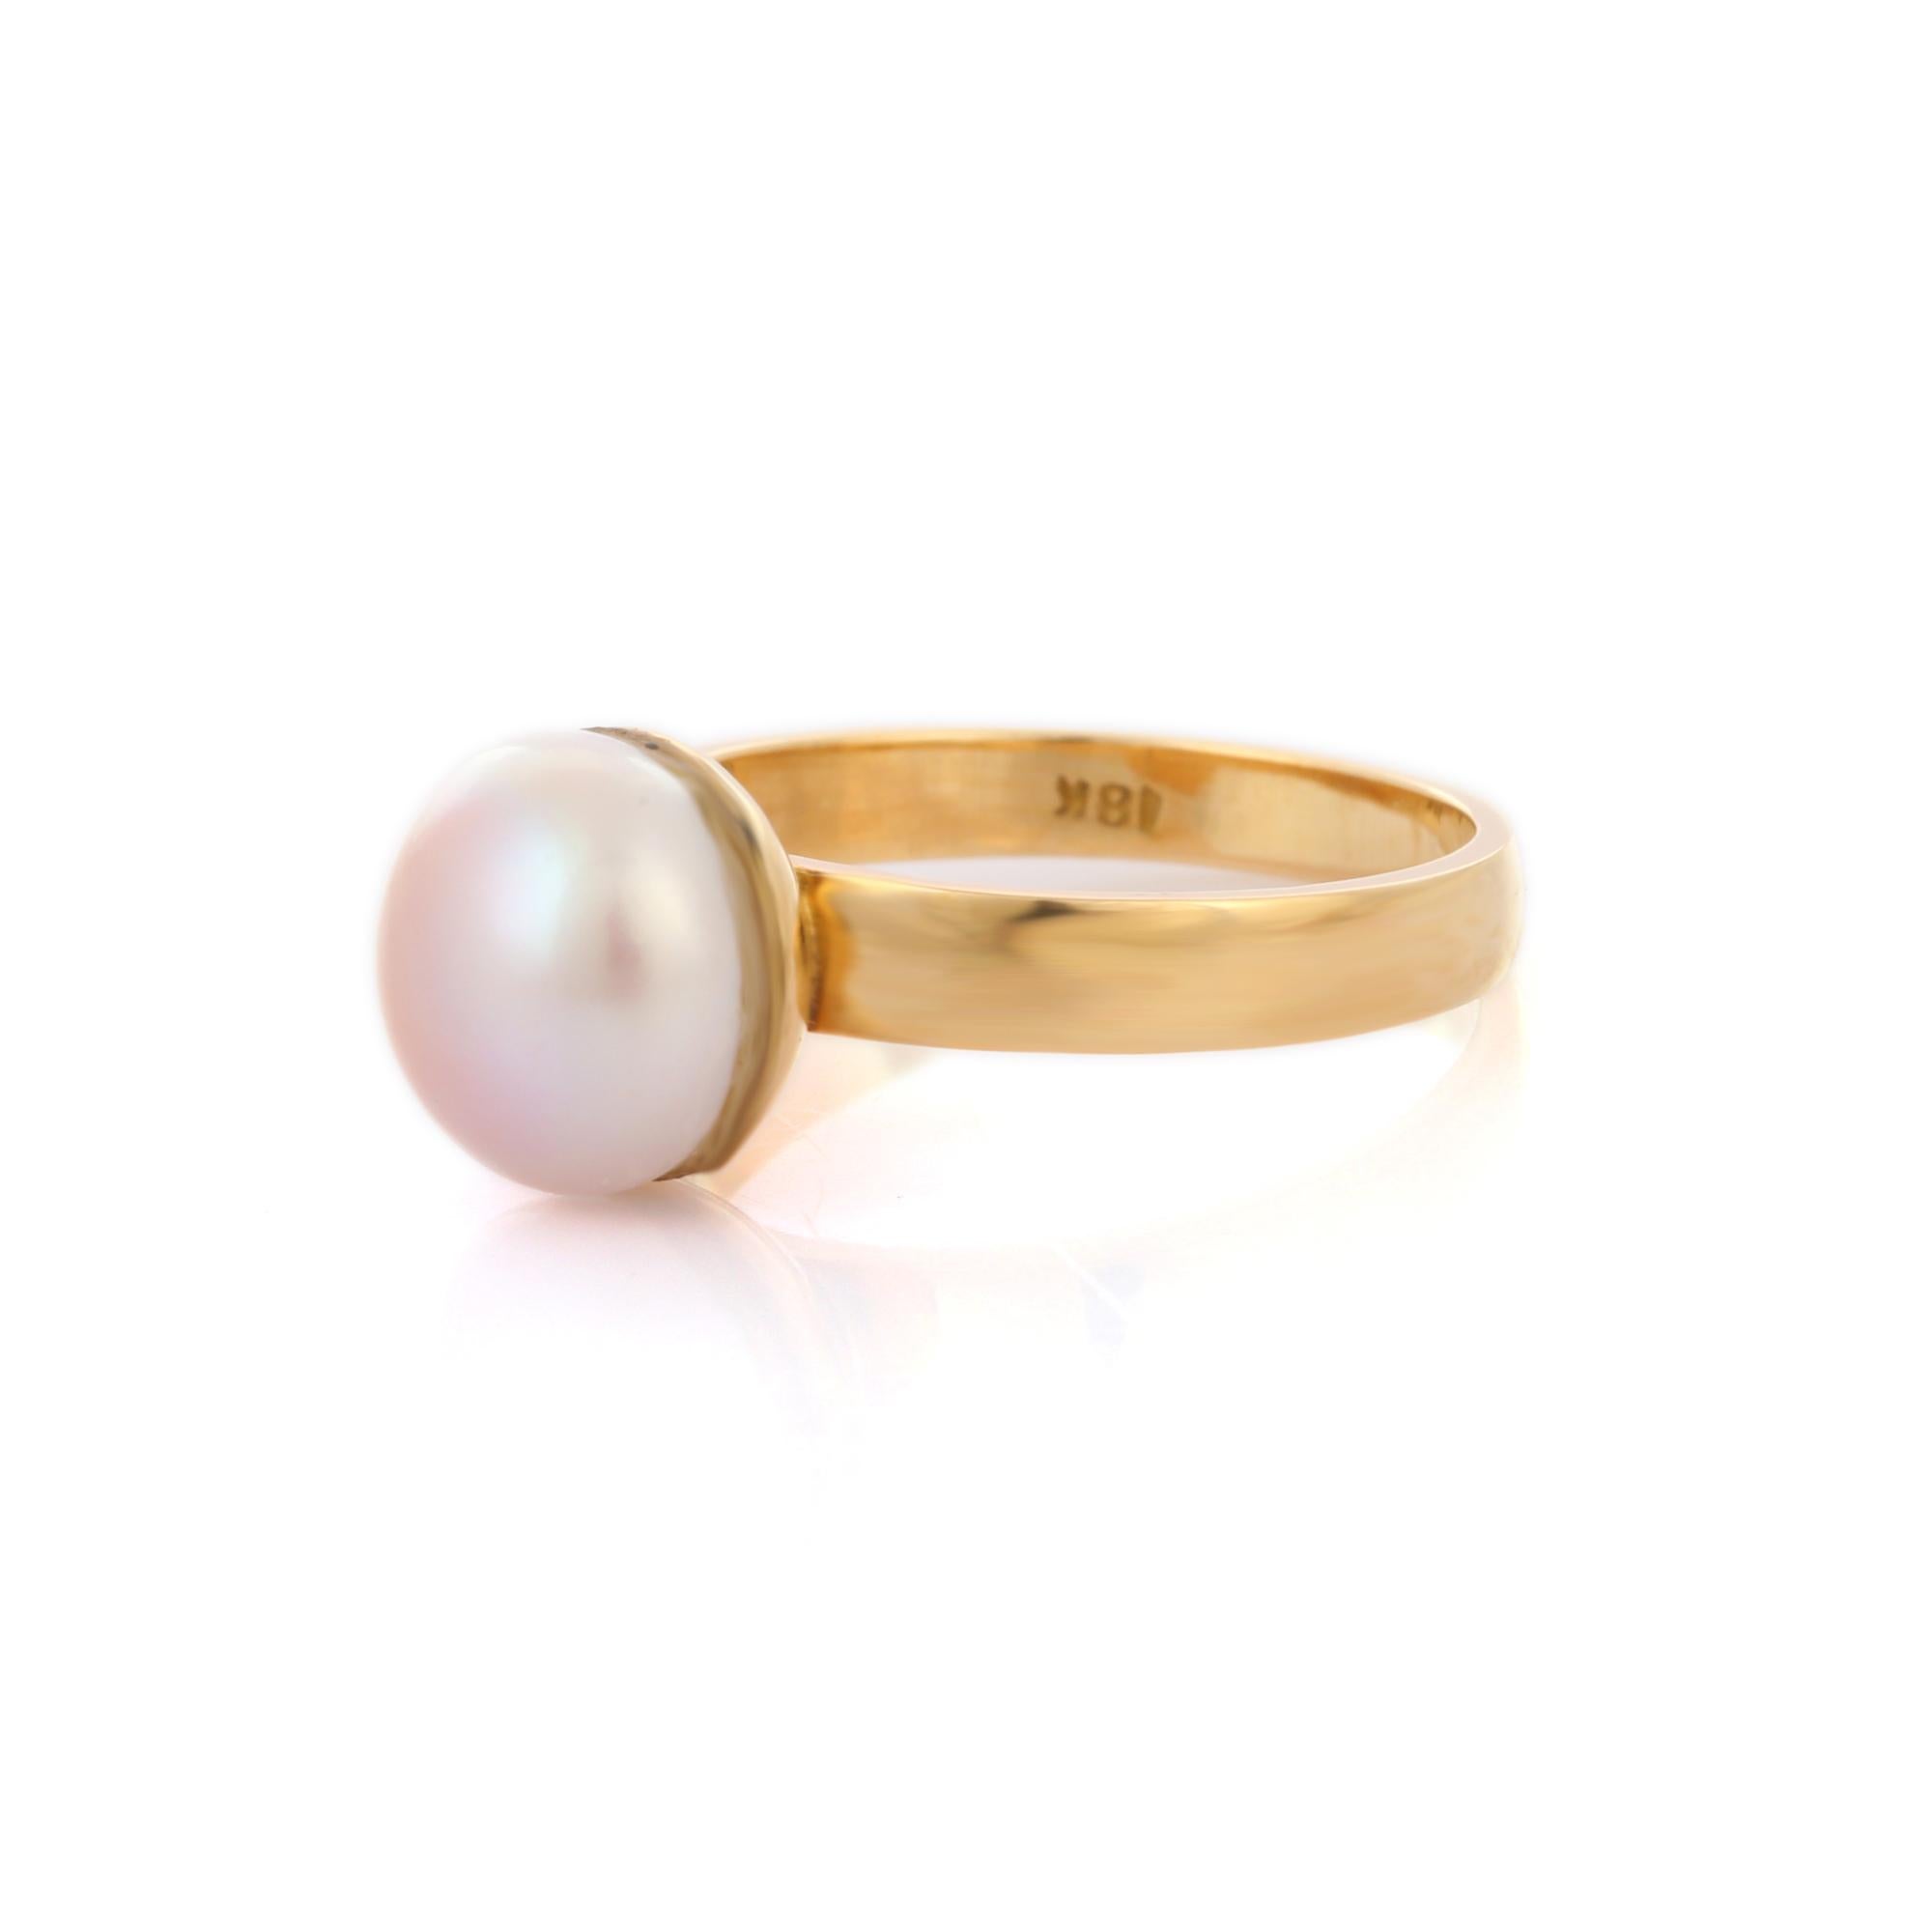 For Sale:  4.3 Carat Pearl Solitaire Ring in 18K Yellow Gold  3